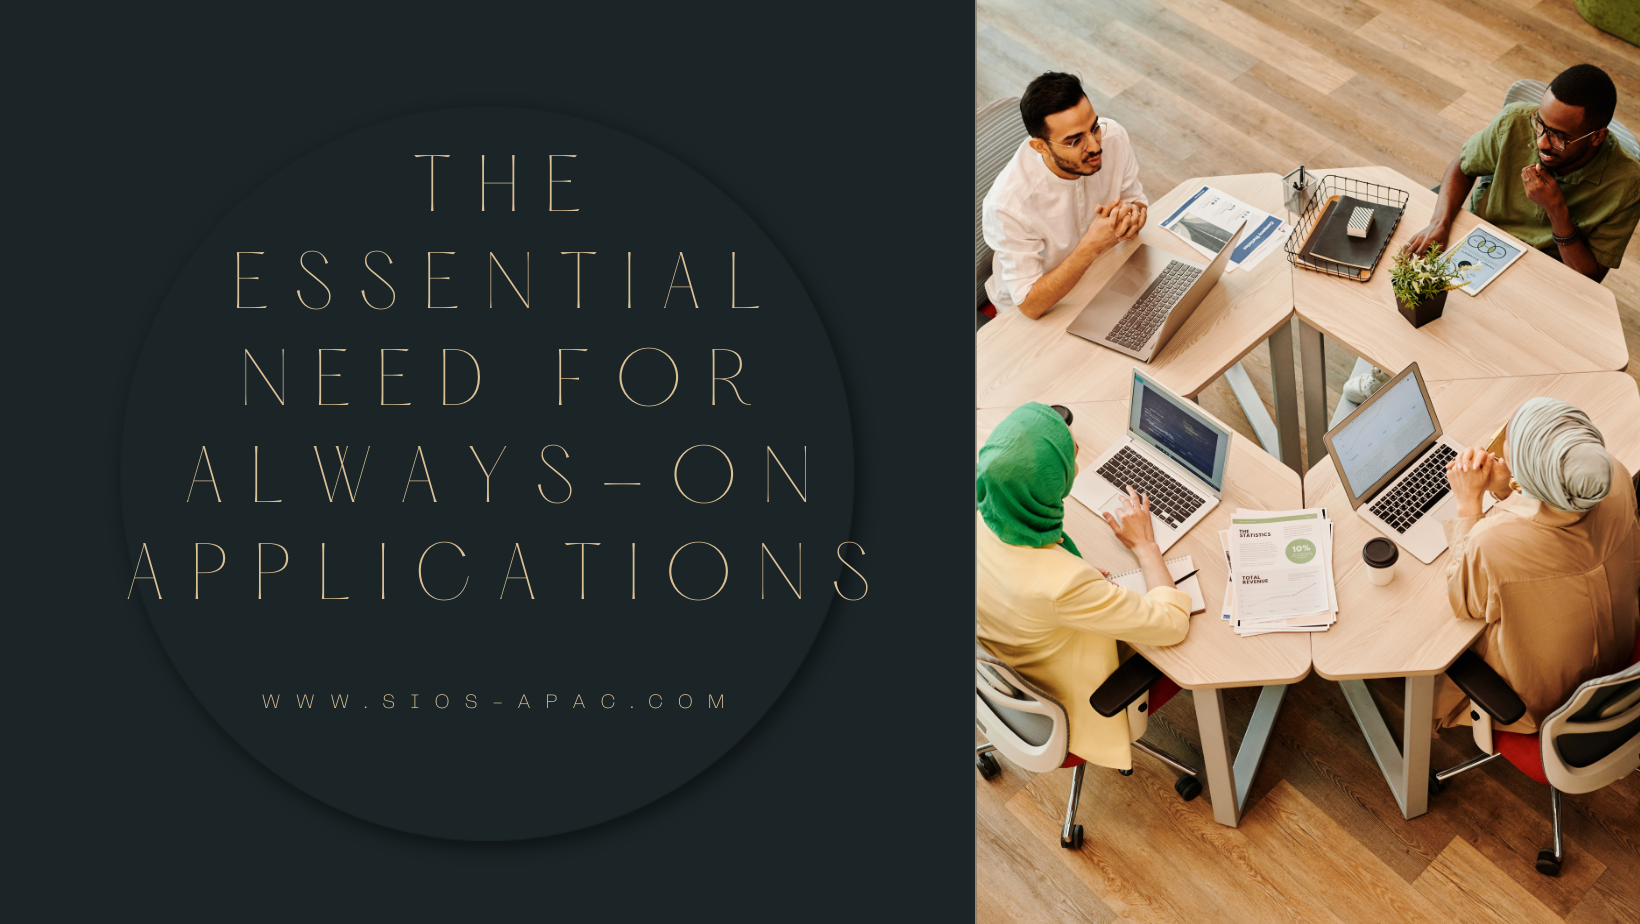 The Essential Need for Always-On Applications